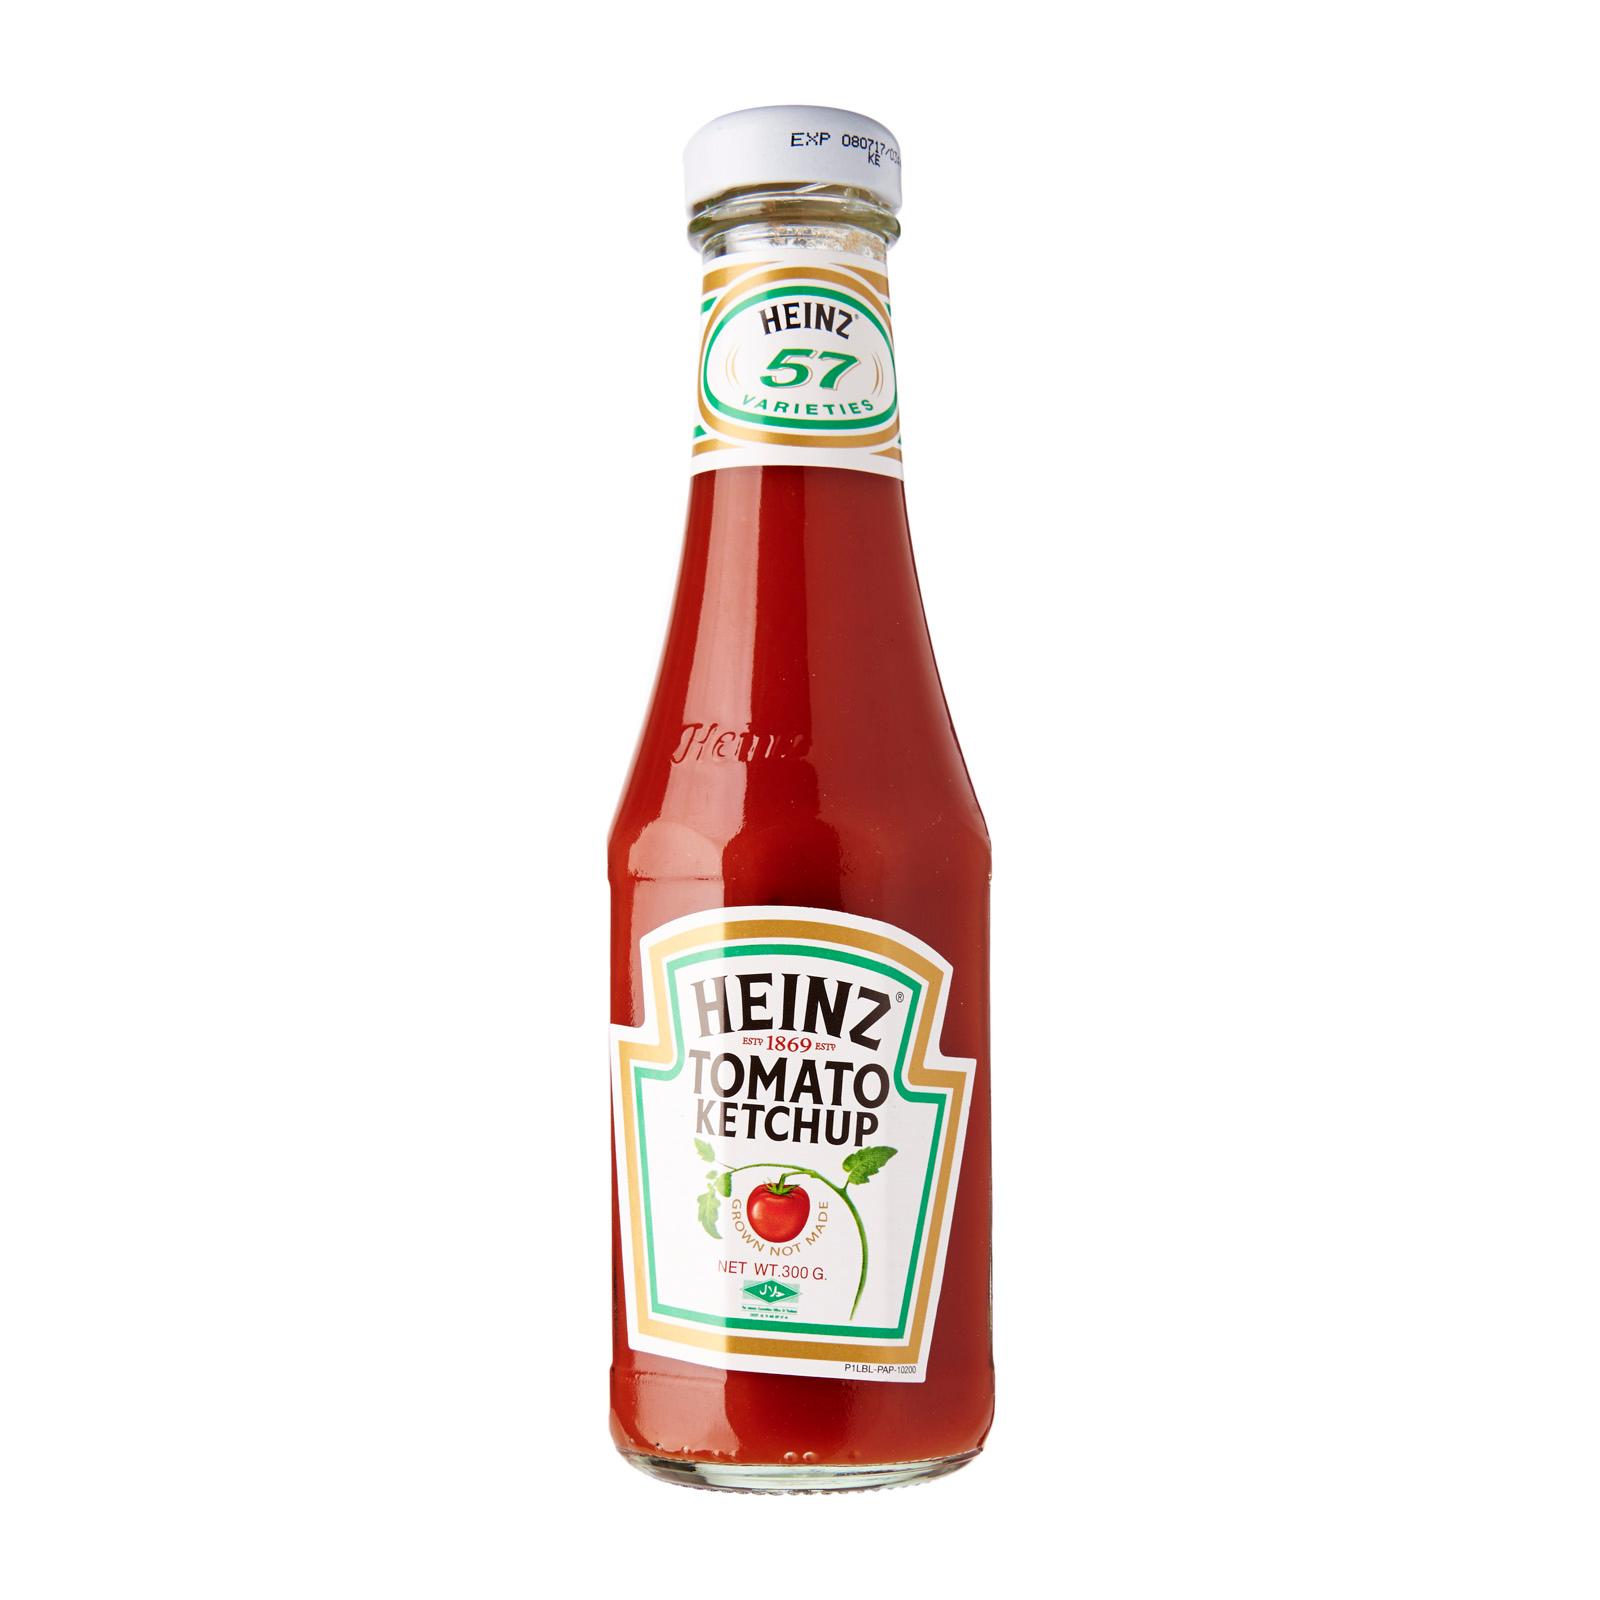 Heinz Tomato Ketchup 300g - from RedMart